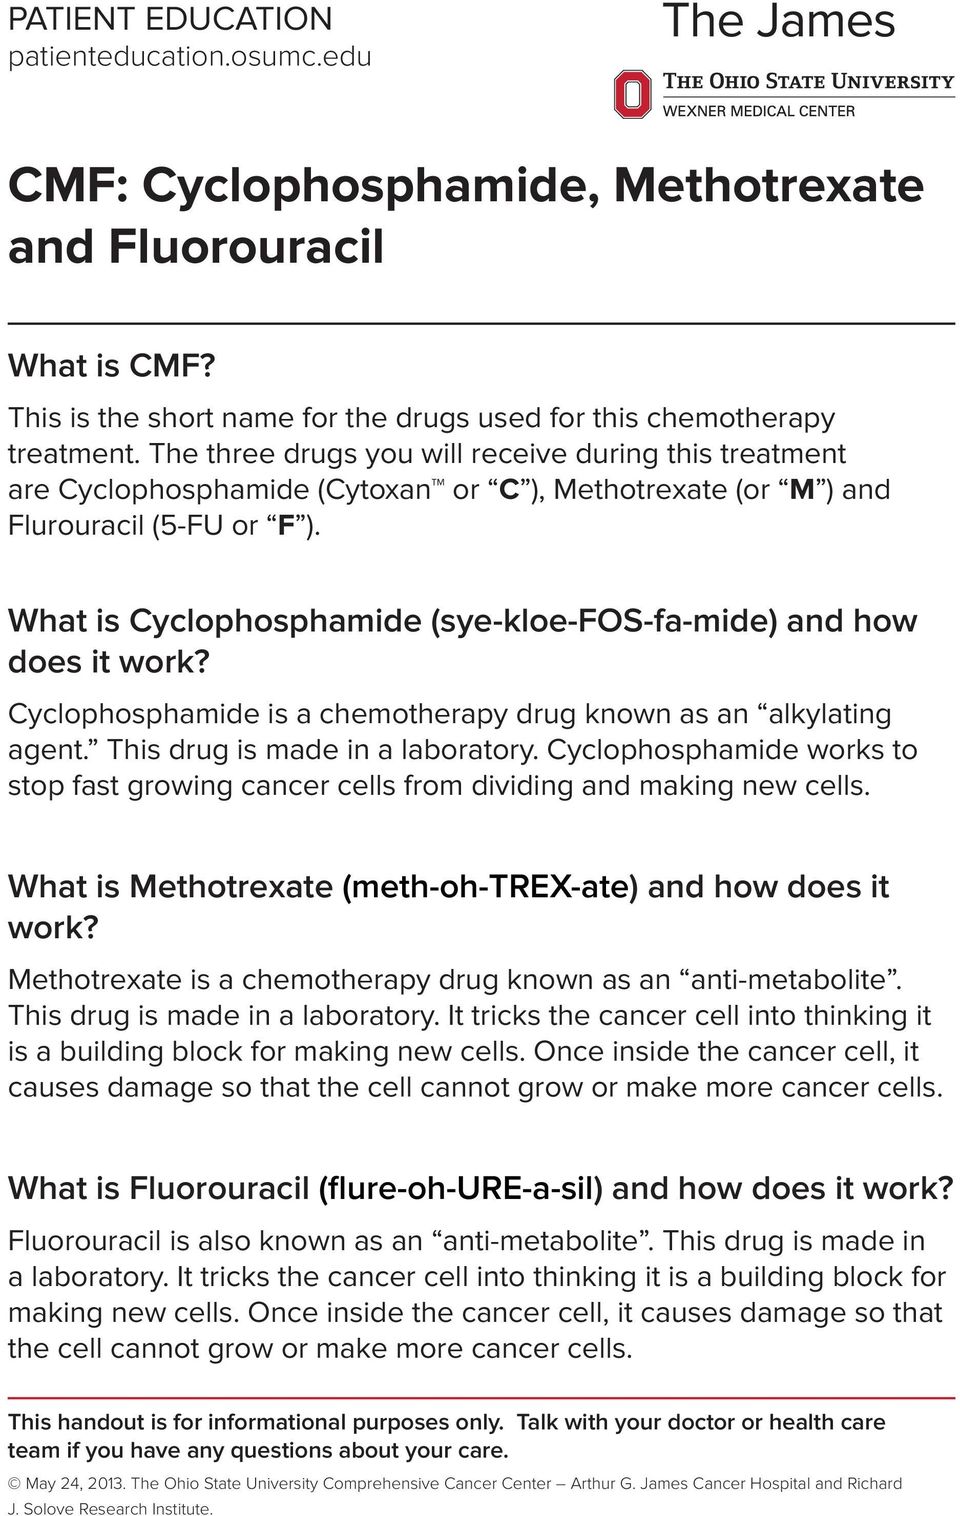 What is Cyclophosphamide (sye-kloe-fos-fa-mide) and how does it work? Cyclophosphamide is a chemotherapy drug known as an alkylating agent. This drug is made in a laboratory.